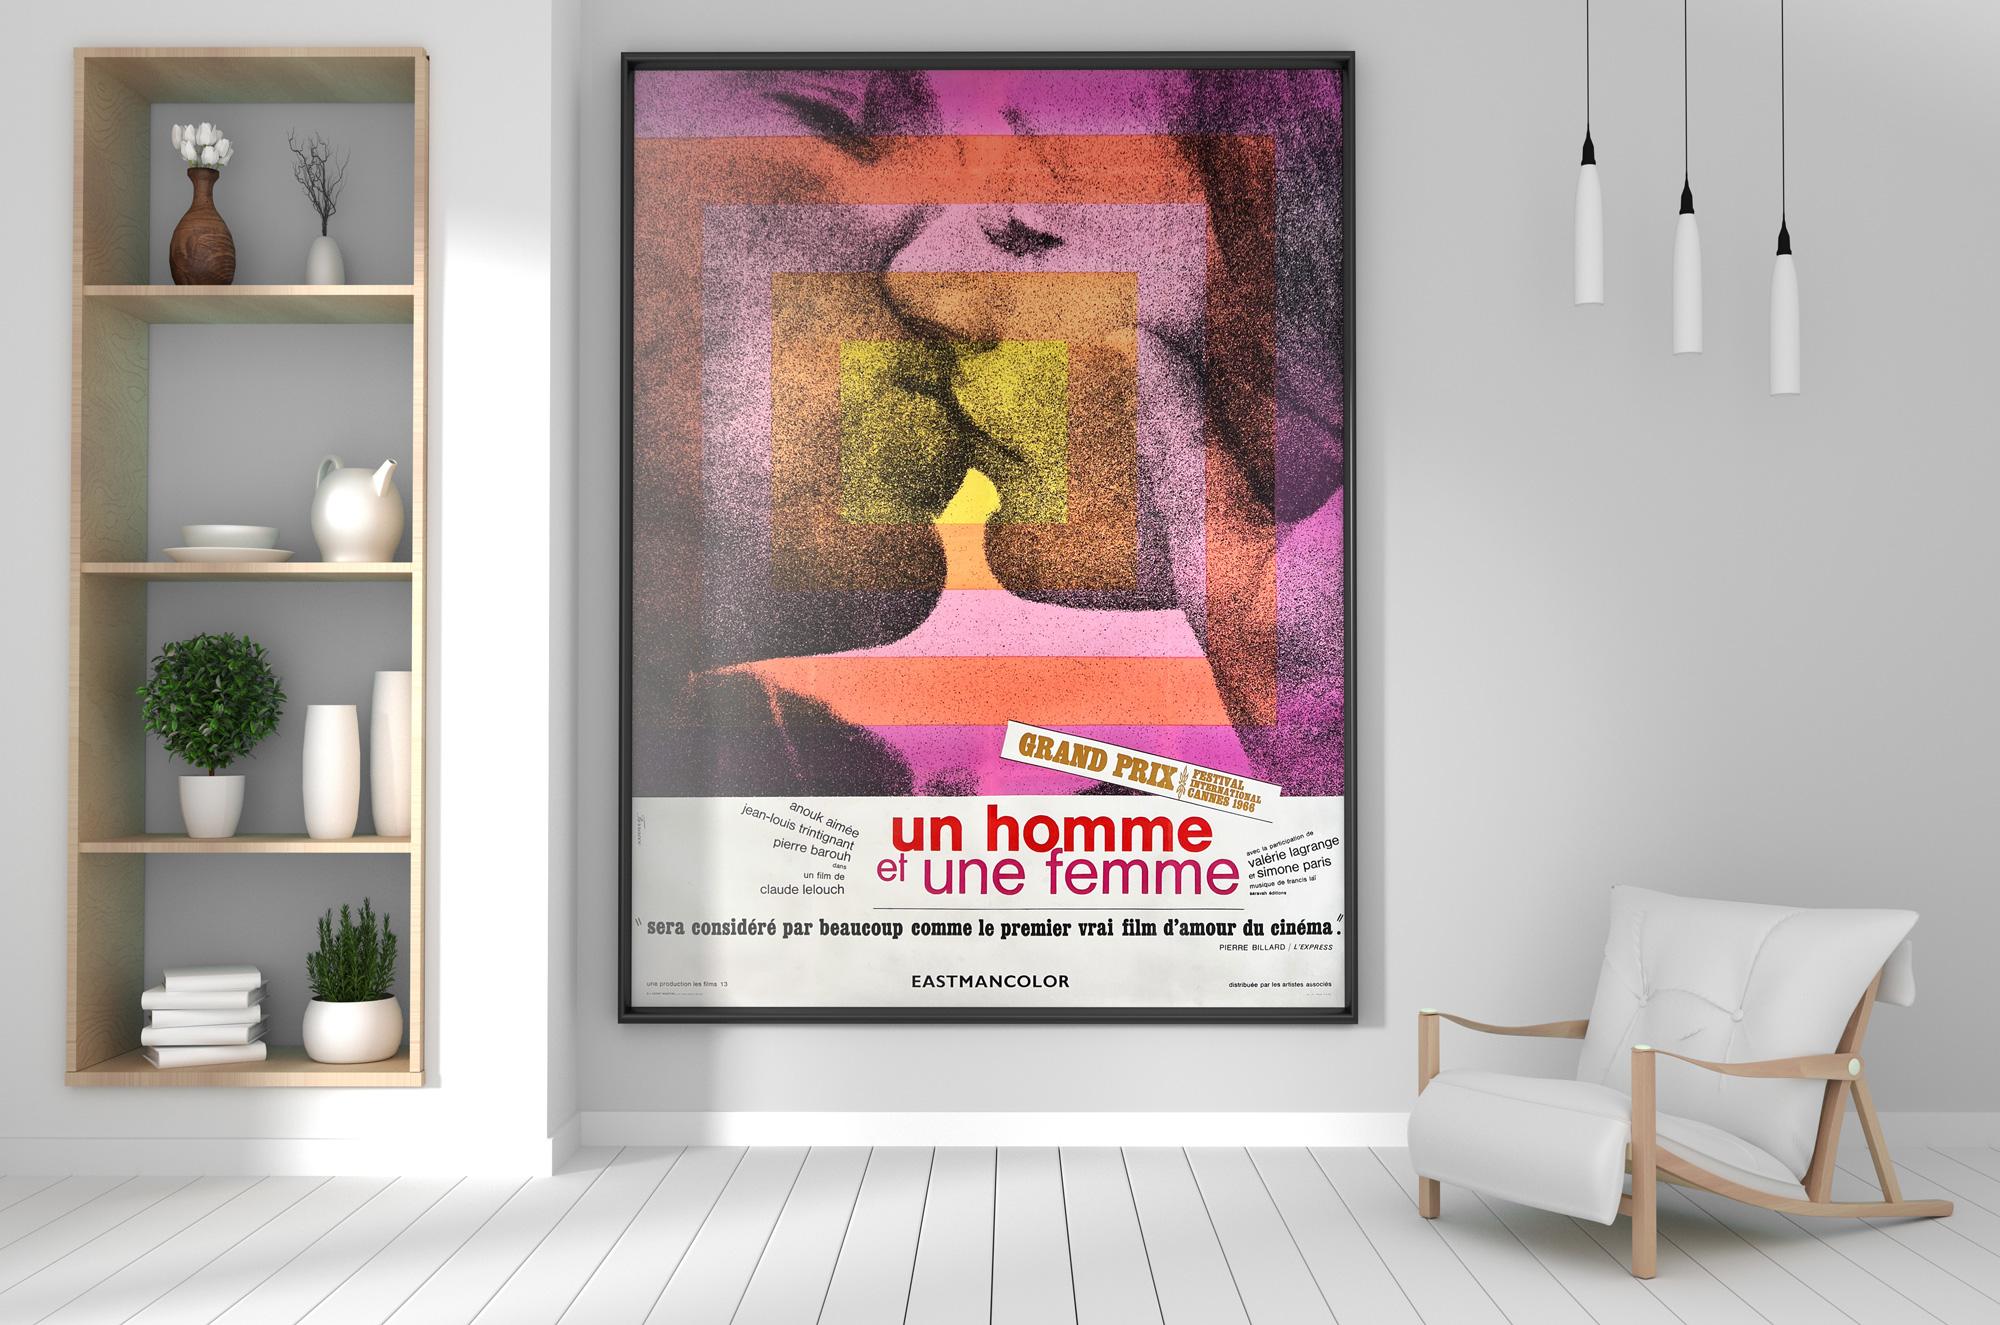 We adore this original first-year-of-release country-of-origin French film poster for Claude Lelouch's Oscar and Palme d'Or winner Un Homme et Une Femme (A Man and a Woman). Extremely rare poster, especially this style with the wonderful concentric